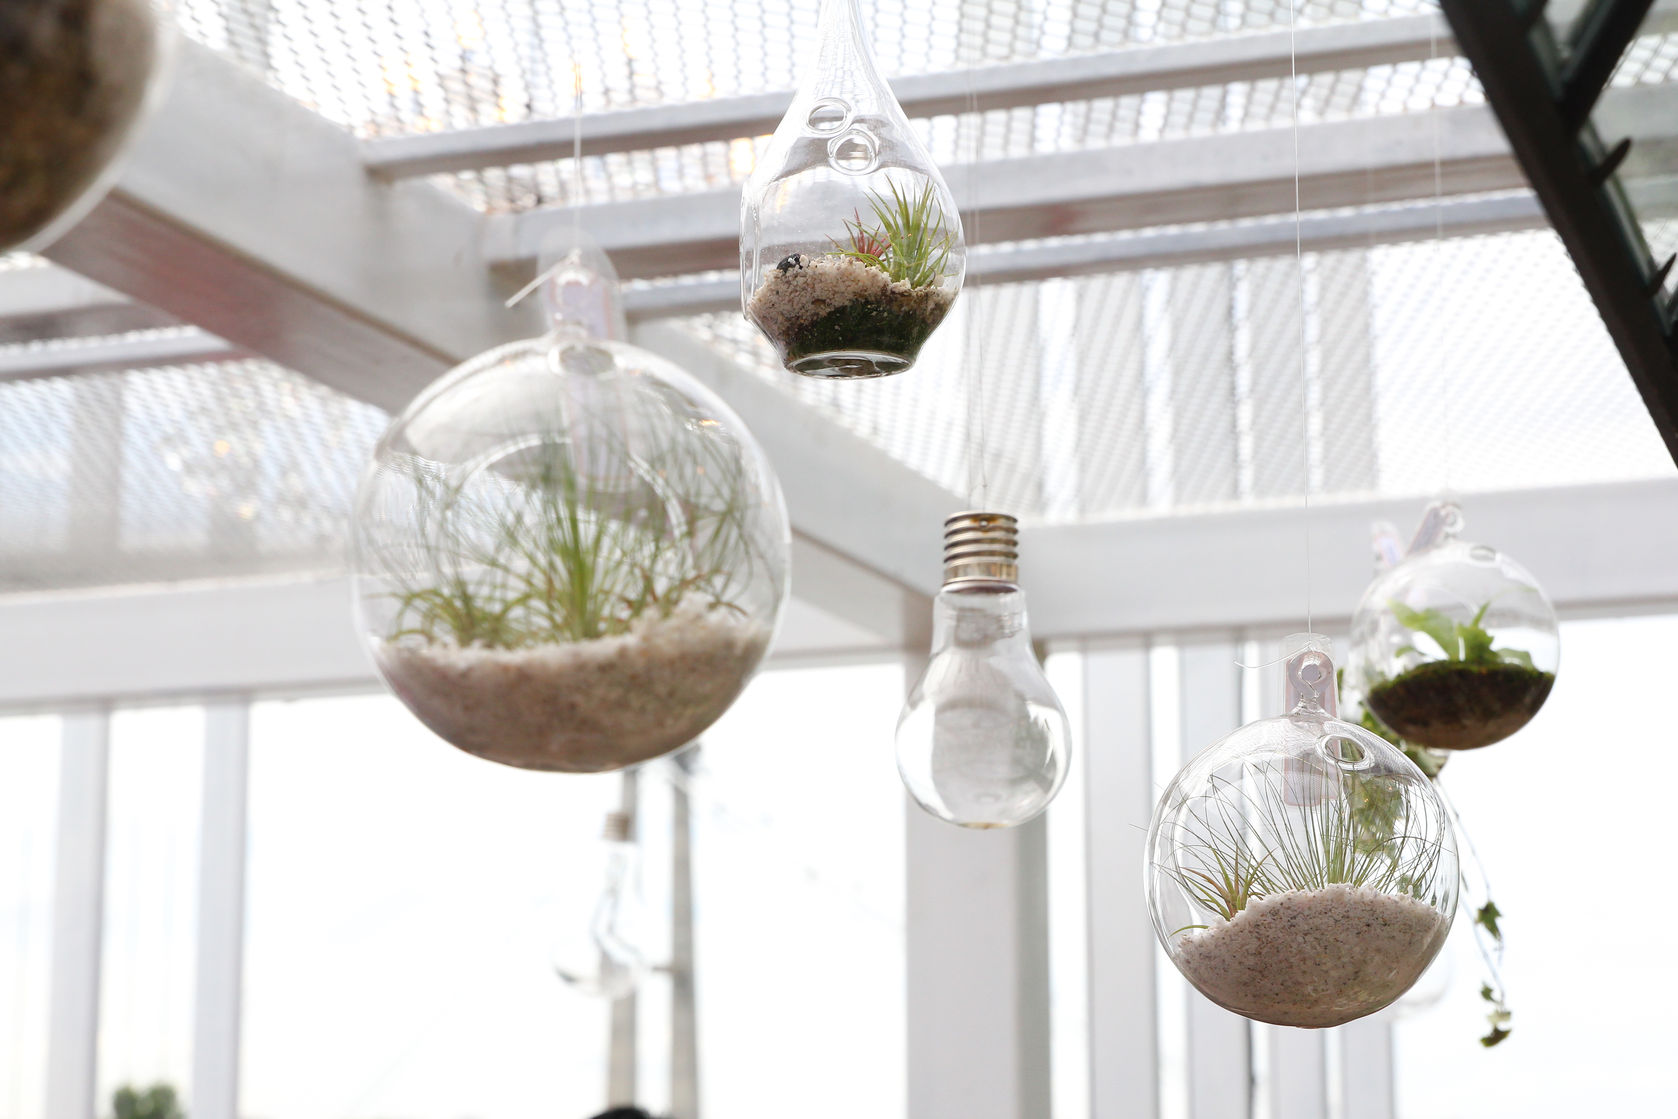 Hanging glass ball terrariums, filled with sand and air plants in a brightly lit space